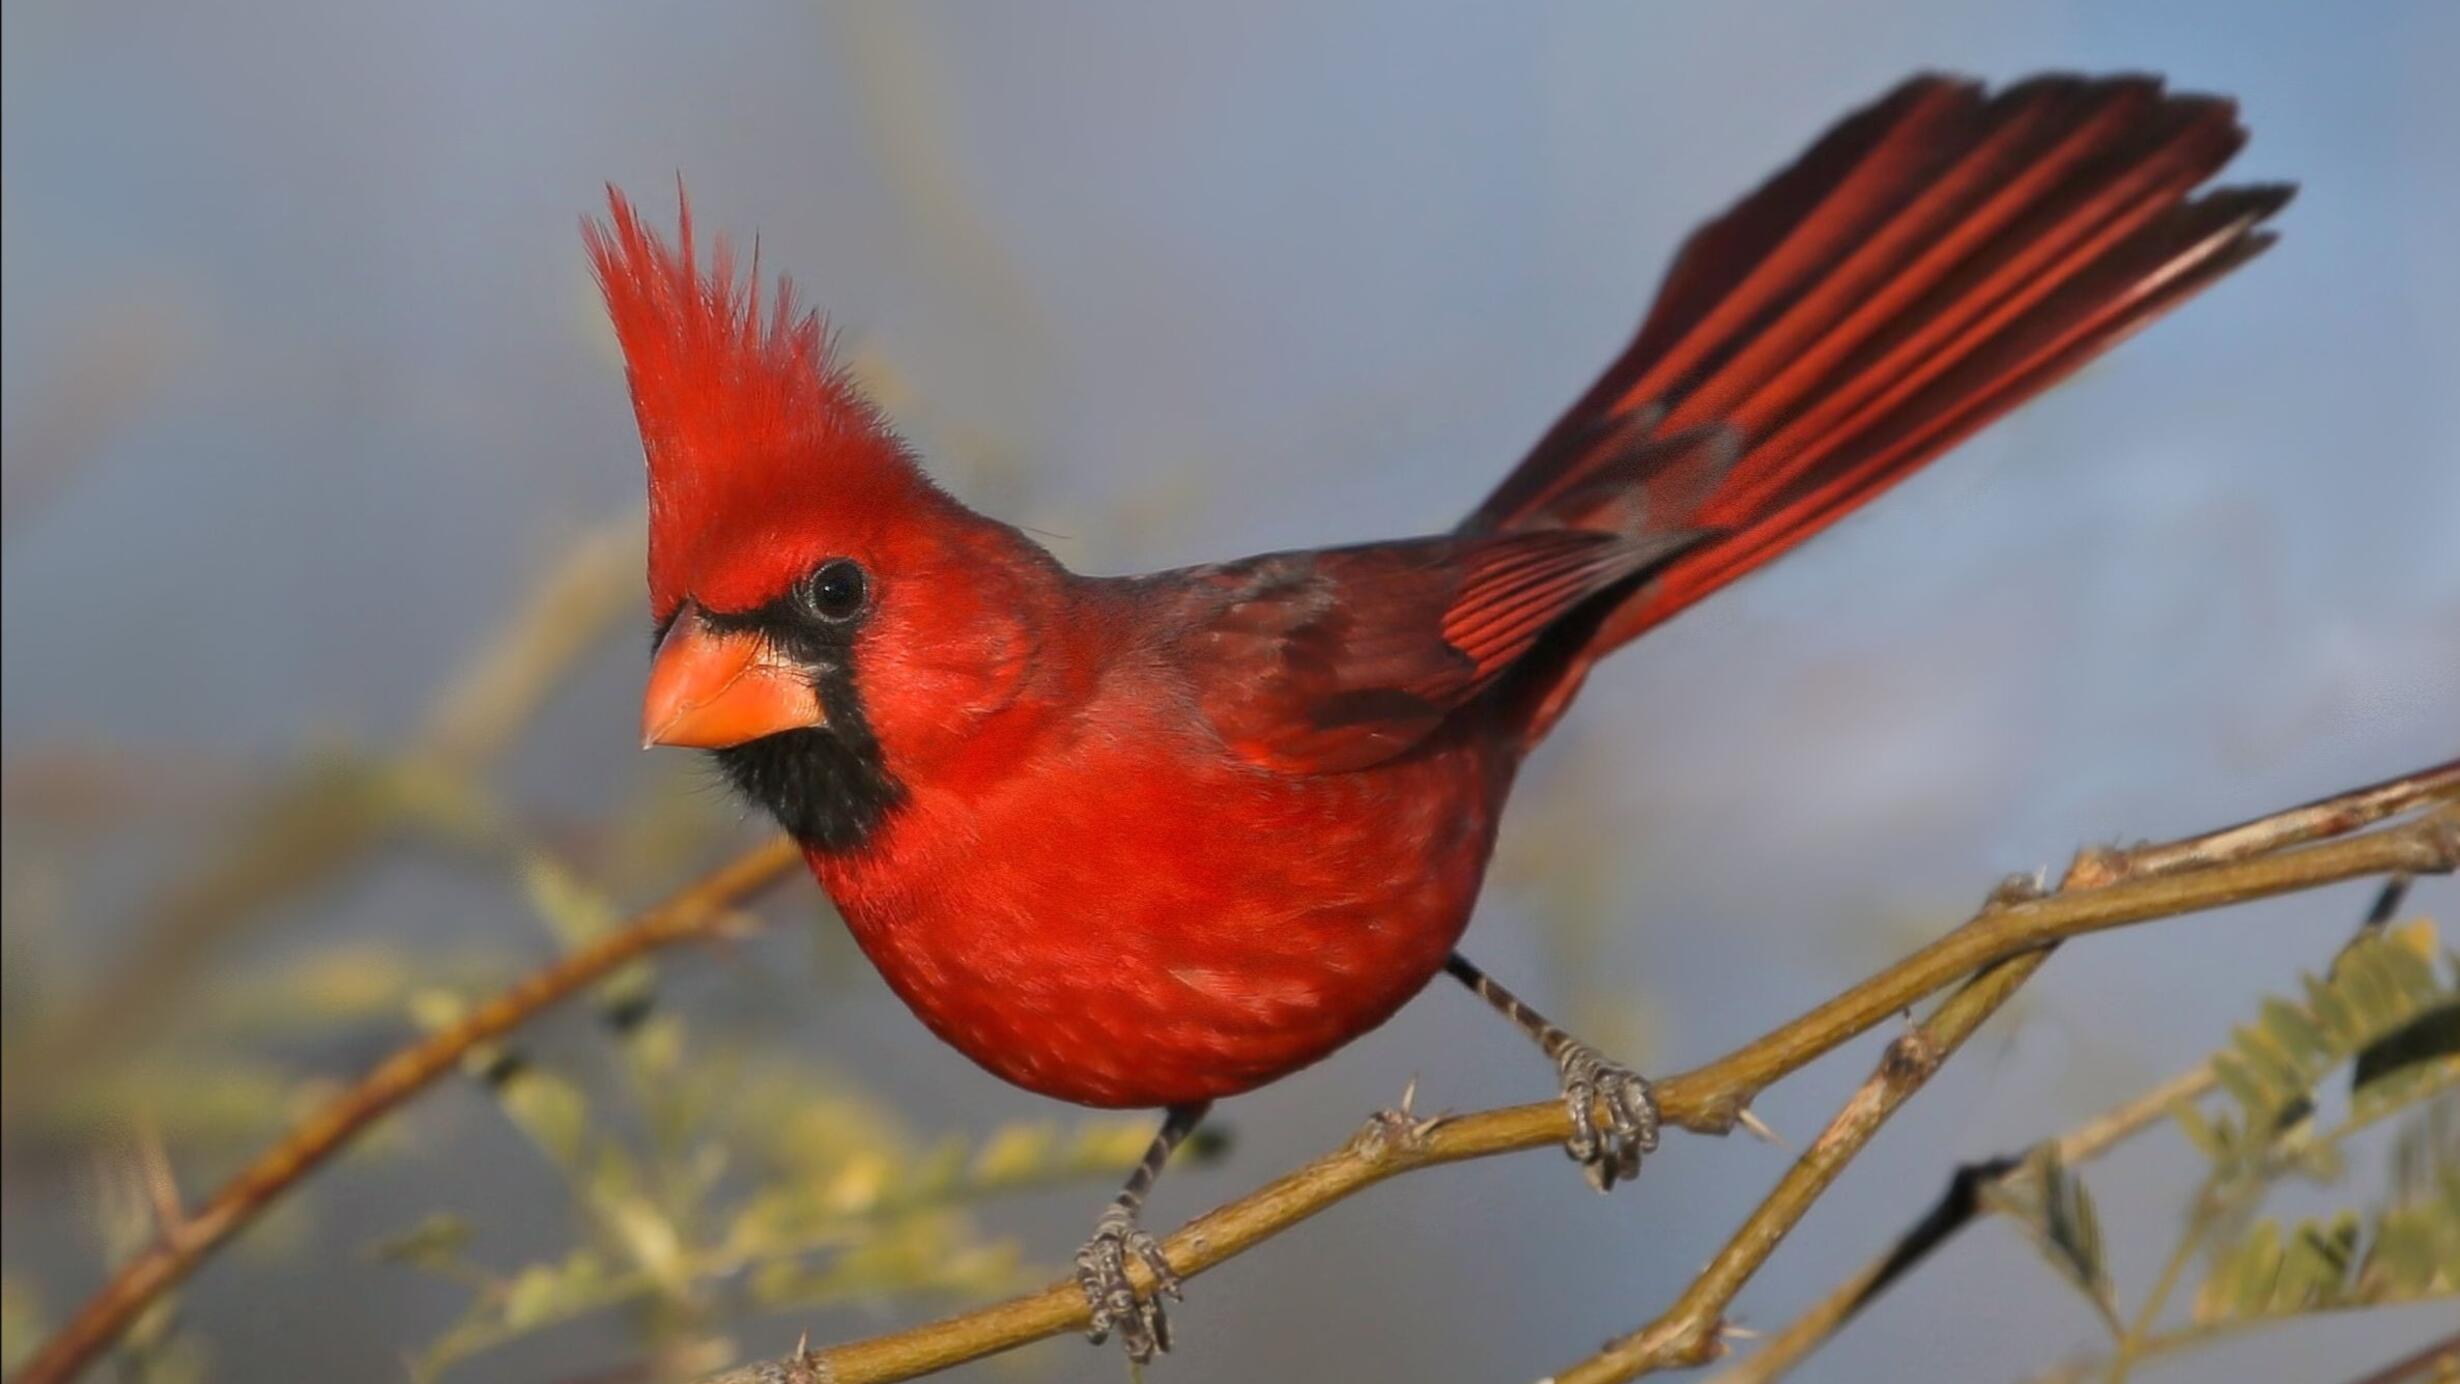 A Northern Cardinal perches on a branch, photographed in Arizona.